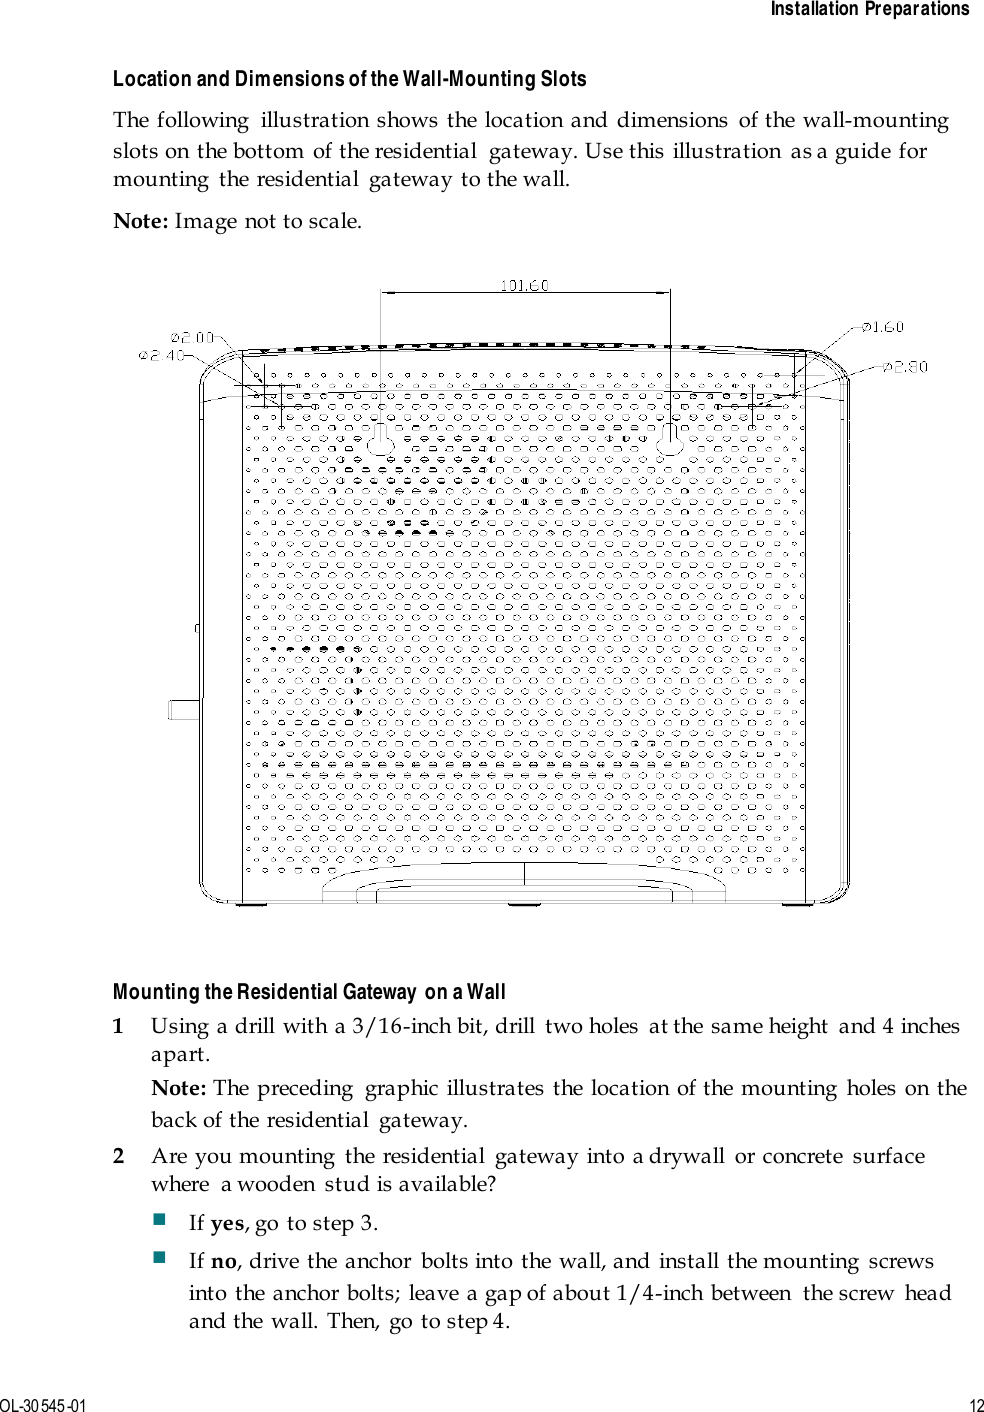    Installation Preparations  OL-30 545-01  12  Location and Dimensions of the Wall-Mounting Slots The following  illustration shows the location and dimensions of the wall-mounting slots on the bottom of the residential  gateway. Use this illustration  as a guide for mounting  the residential  gateway to the wall. Note: Image not to scale.   Mounting the Residential Gateway  on a Wall 1 Using a drill with a 3/16-inch bit, drill  two holes  at the same height  and 4 inches apart. Note: The preceding  graphic illustrates the location of the mounting holes on the back of the residential  gateway. 2 Are you mounting the residential gateway into a drywall or concrete surface where  a wooden  stud is available?  If yes, go to step 3.  If no, drive the anchor bolts into the wall, and install the mounting screws into the anchor bolts; leave a gap of about 1/4-inch between  the screw  head and the wall. Then, go to step 4. 